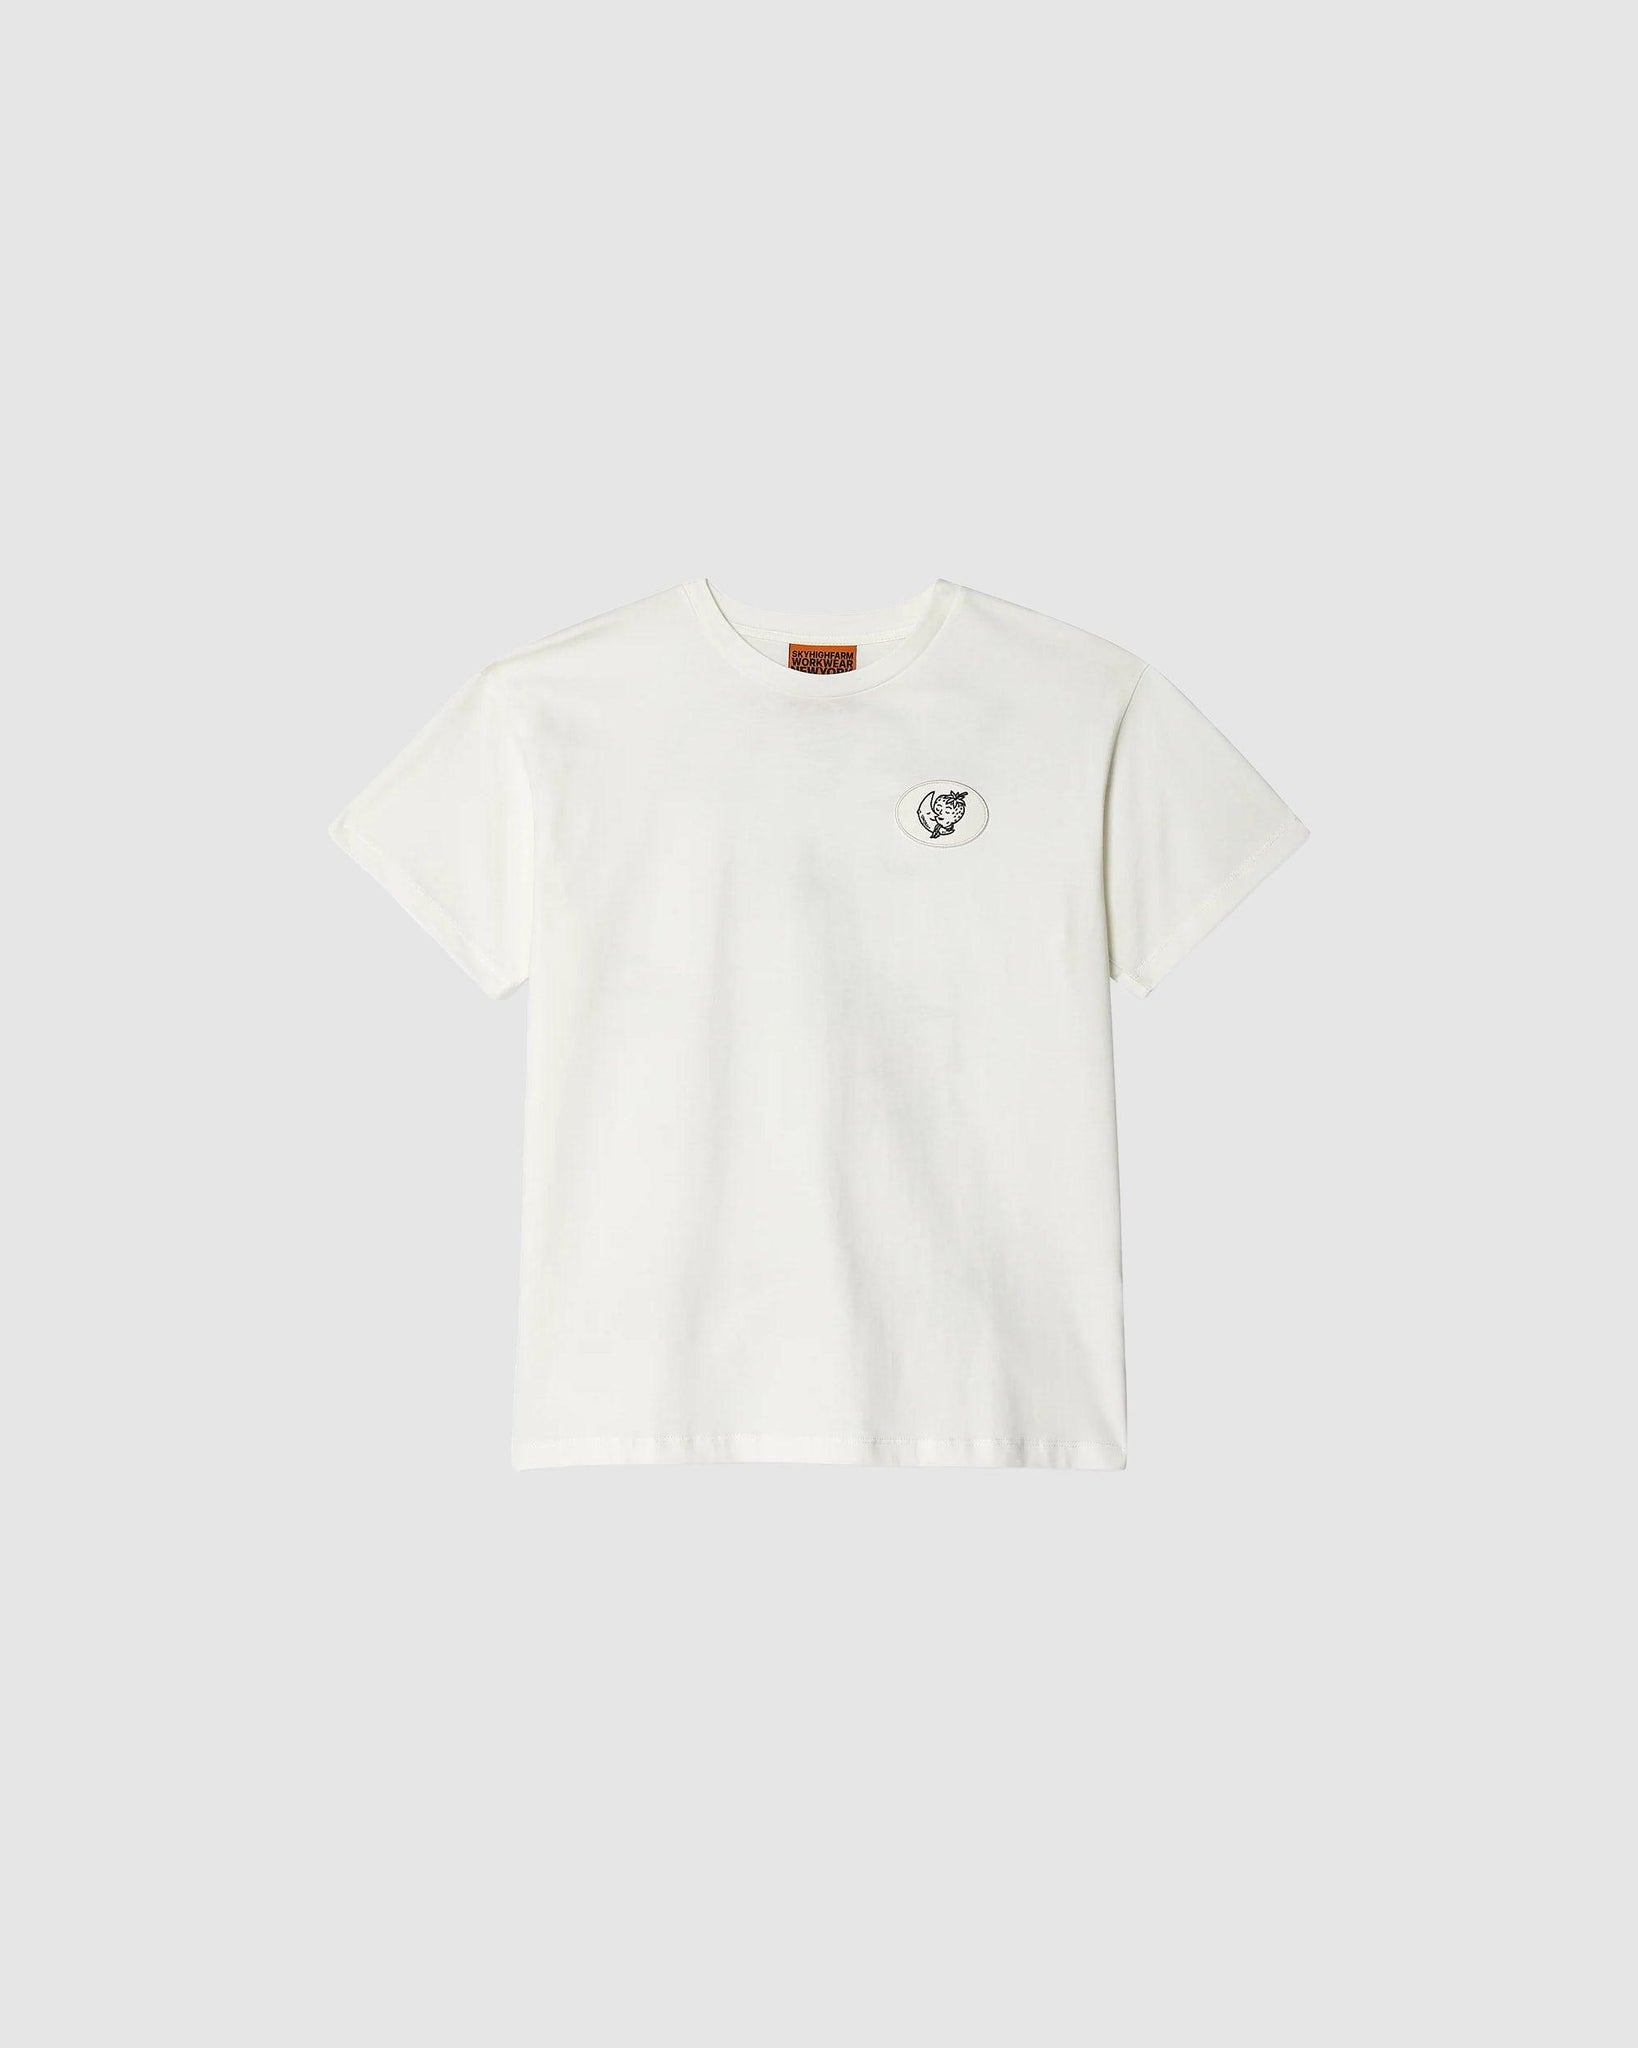 Alastair McKimm Workwear T-Shirt - {{ collection.title }} - Chinatown Country Club 